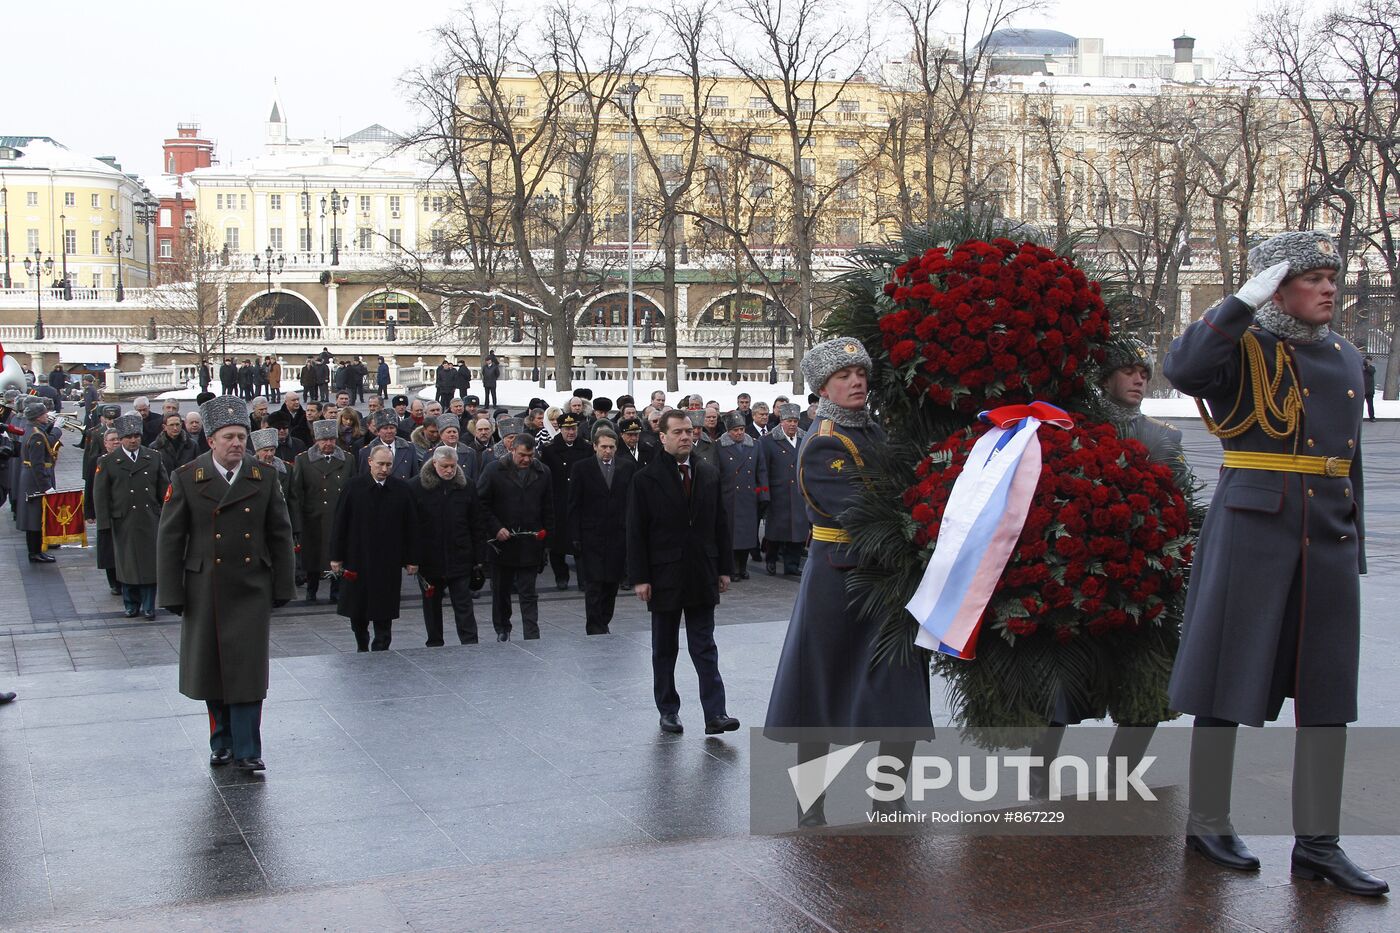 Wreath-laying ceremony at Tomb of Unknown Soldier